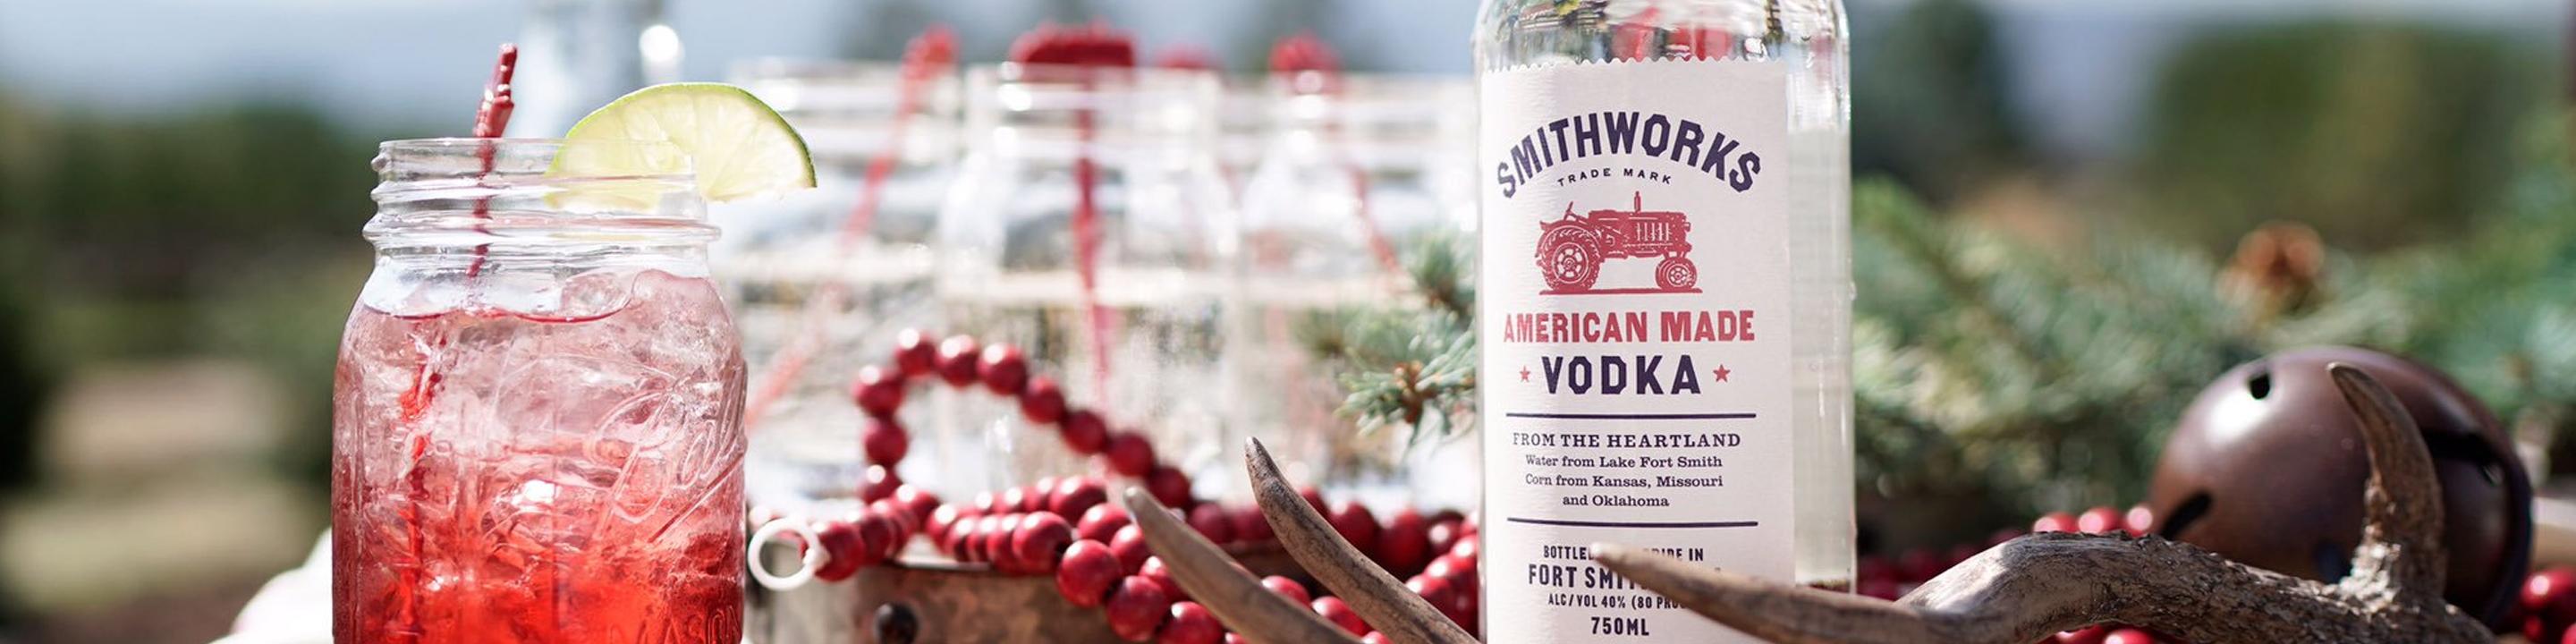 Barstool or backyard, friends or family, neat or otherwise, Smithworks American Made Vodka is the perfect anchor for your good time. It’s made with water from Lake Fort Smith, and with corn from Kansas, Missouri, and Oklahoma. Then it’s distilled three times and charcoal filtered for a smooth taste and clean finish. Buy Smithworks online now from your nearby liquor store via Minibar Delivery. 